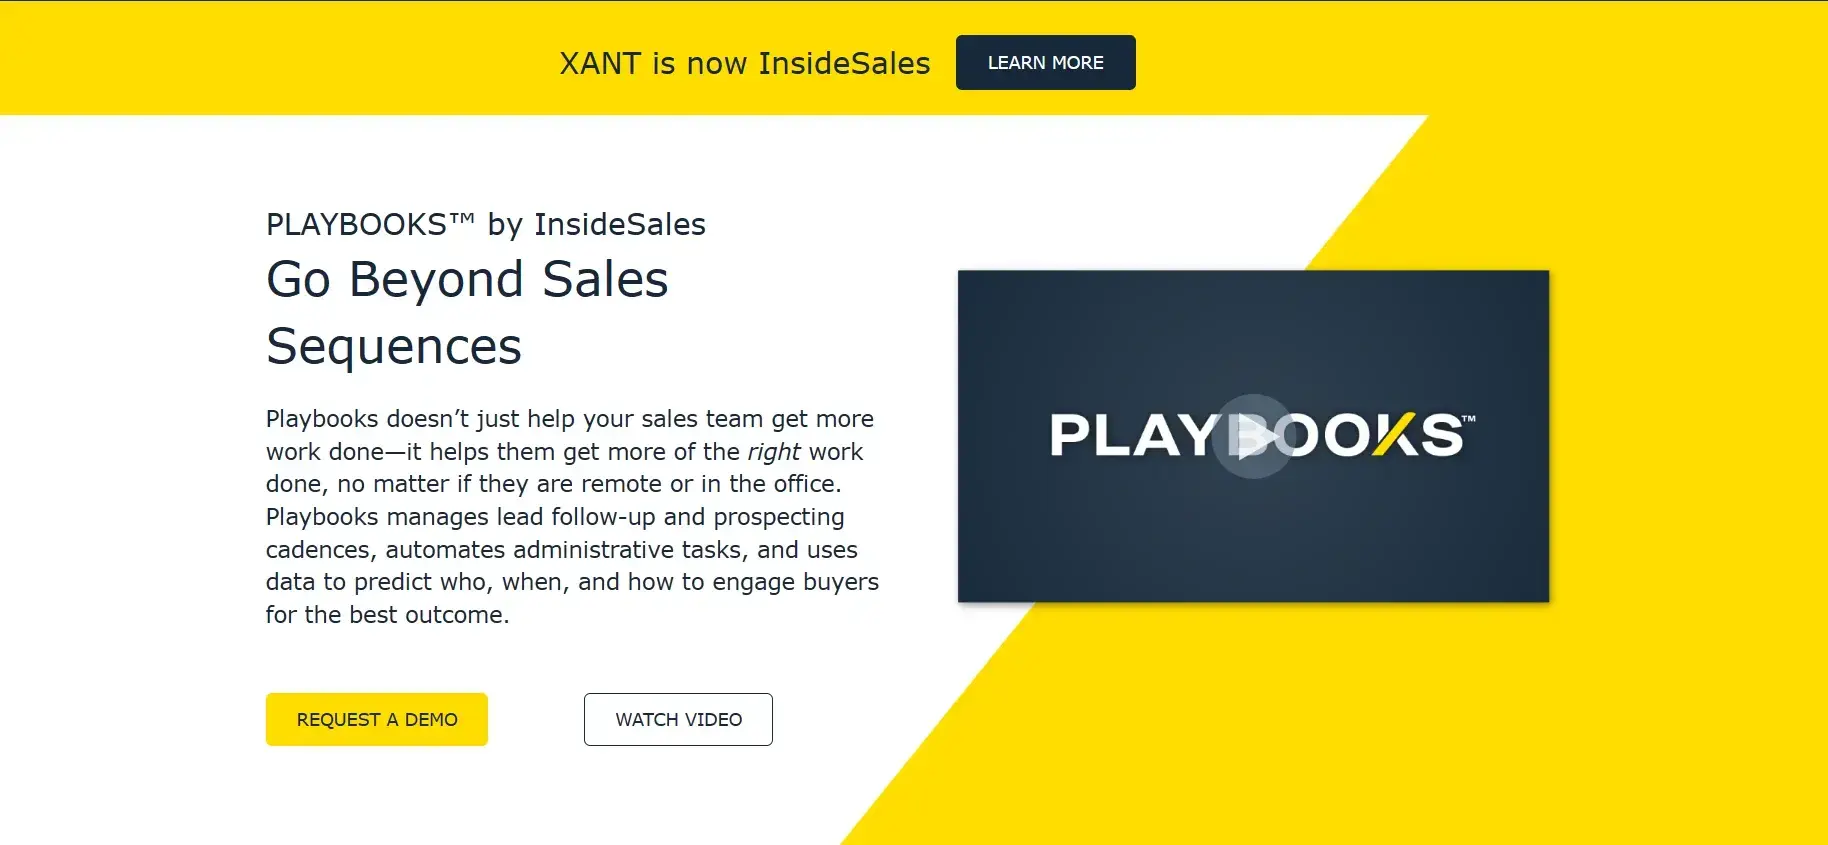 InsideSales Playbooks sales engagement tool supports multi-channel outreach